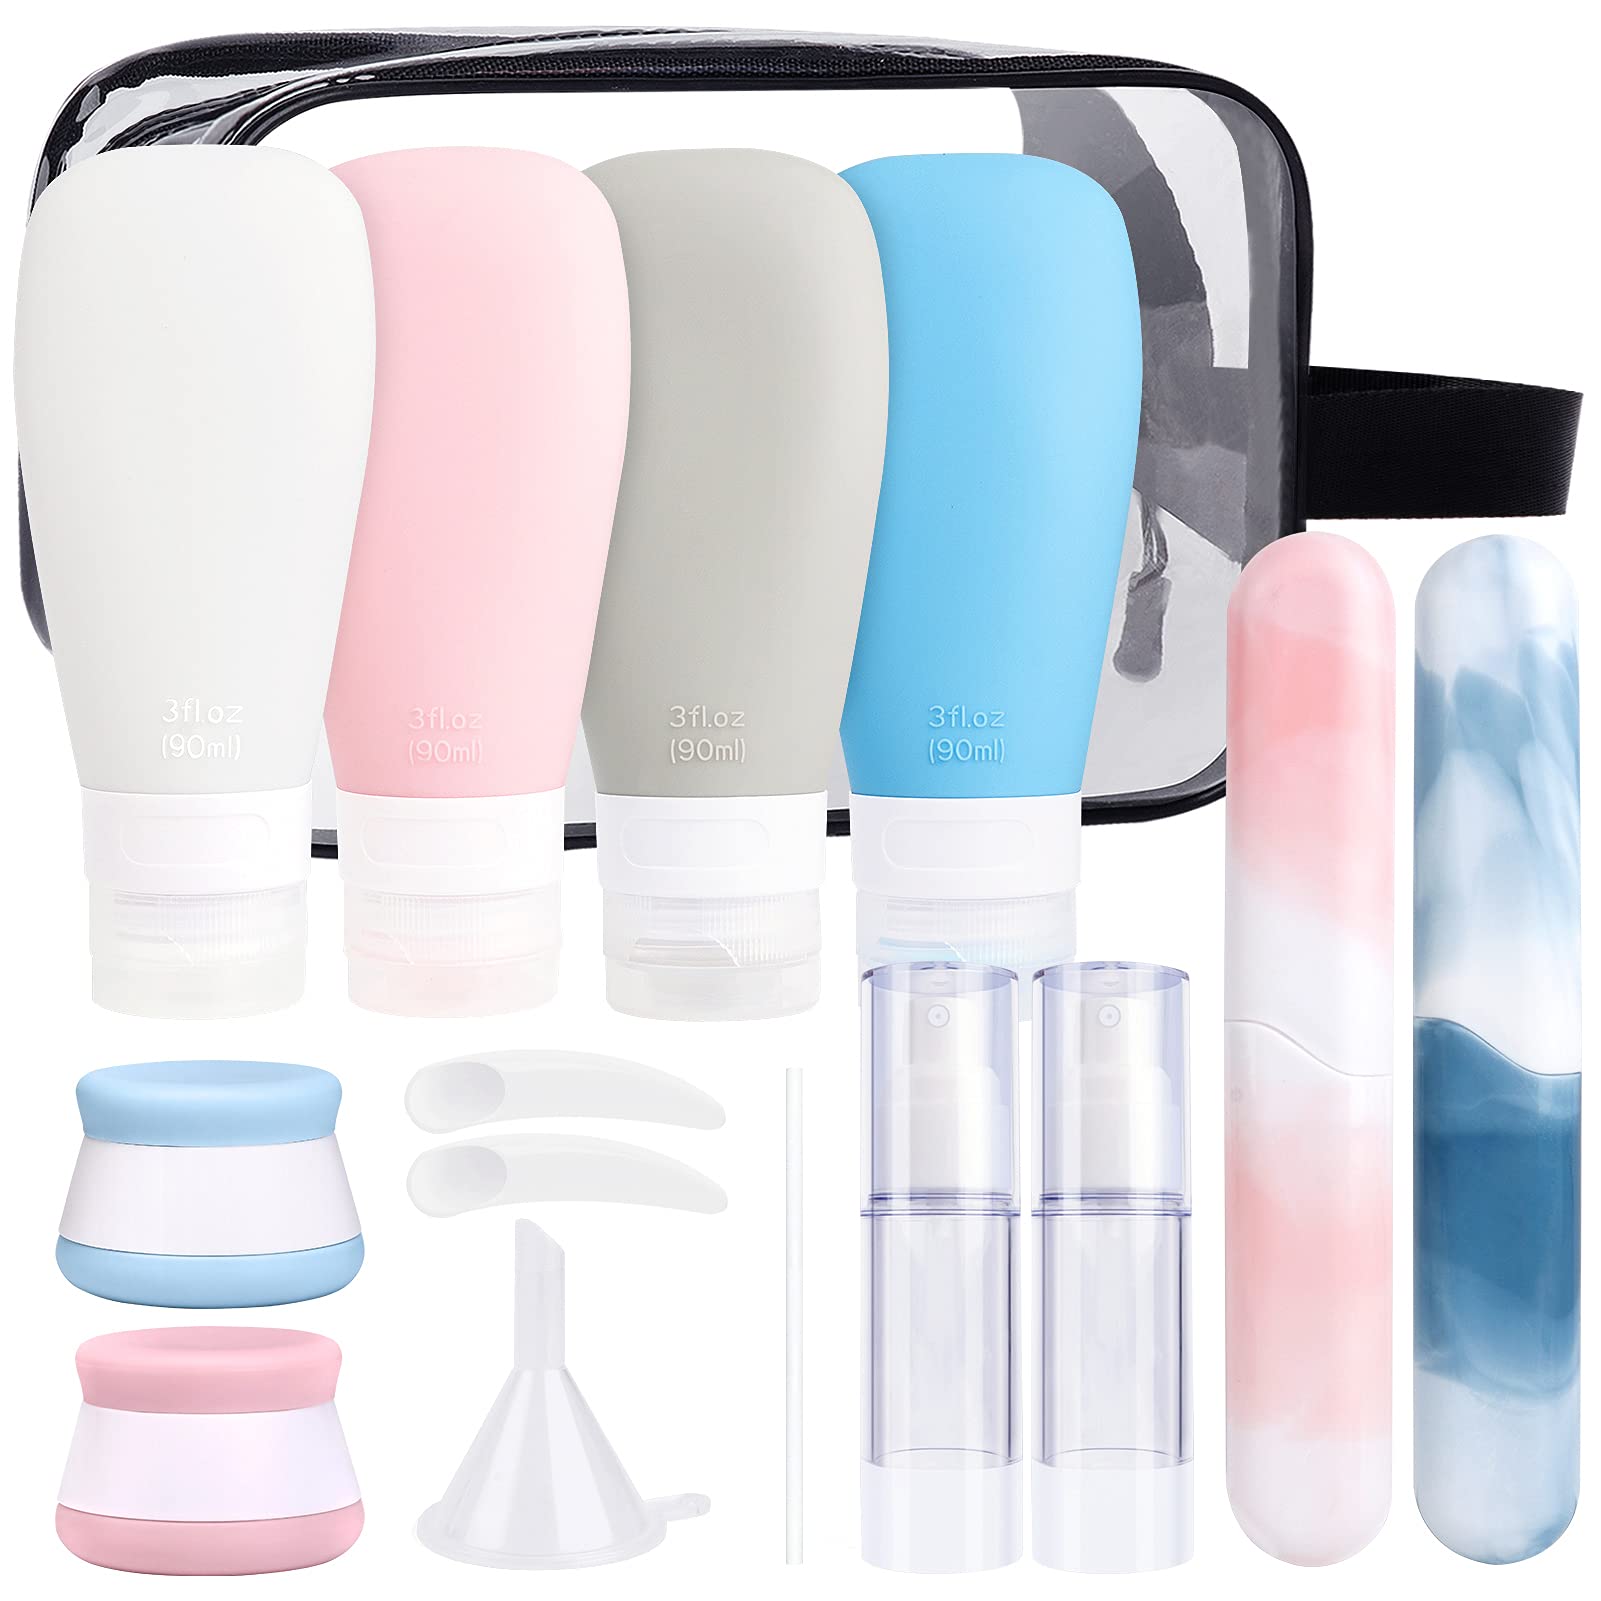 INSFIT Silicone Travel Bottles Set, 17 Pcs Travel Size Toiletries, 3oz  Travel Bottles for Toiletries, Travel Accessories for Women, Airplane  Travel Essentials, Travel Containers for Toiletries Pink